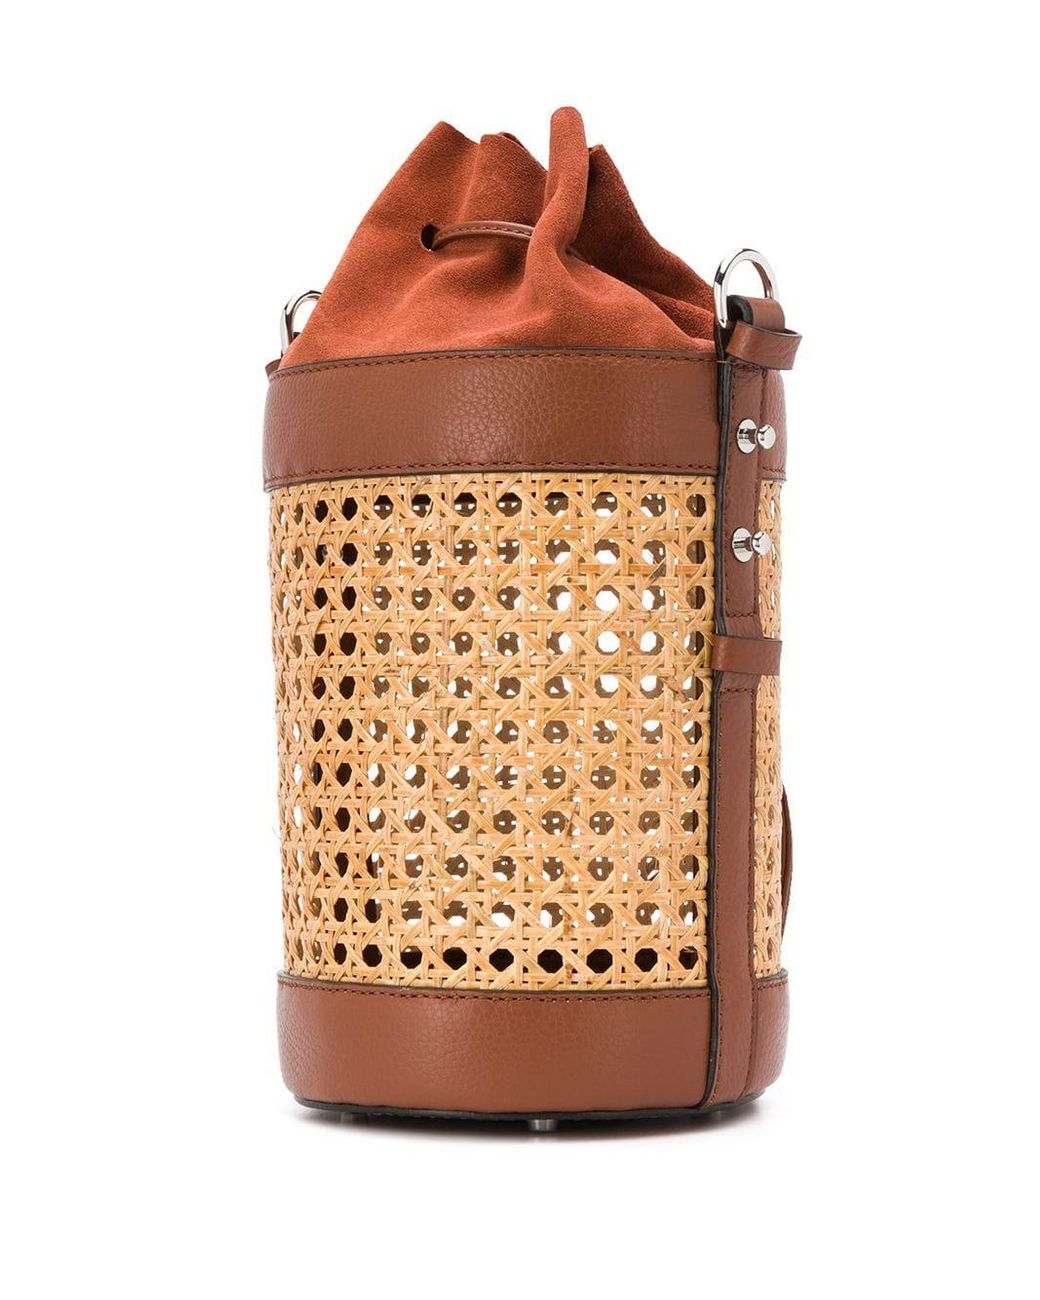 Coccinelle Leather Woven Bucket Bag | Lyst